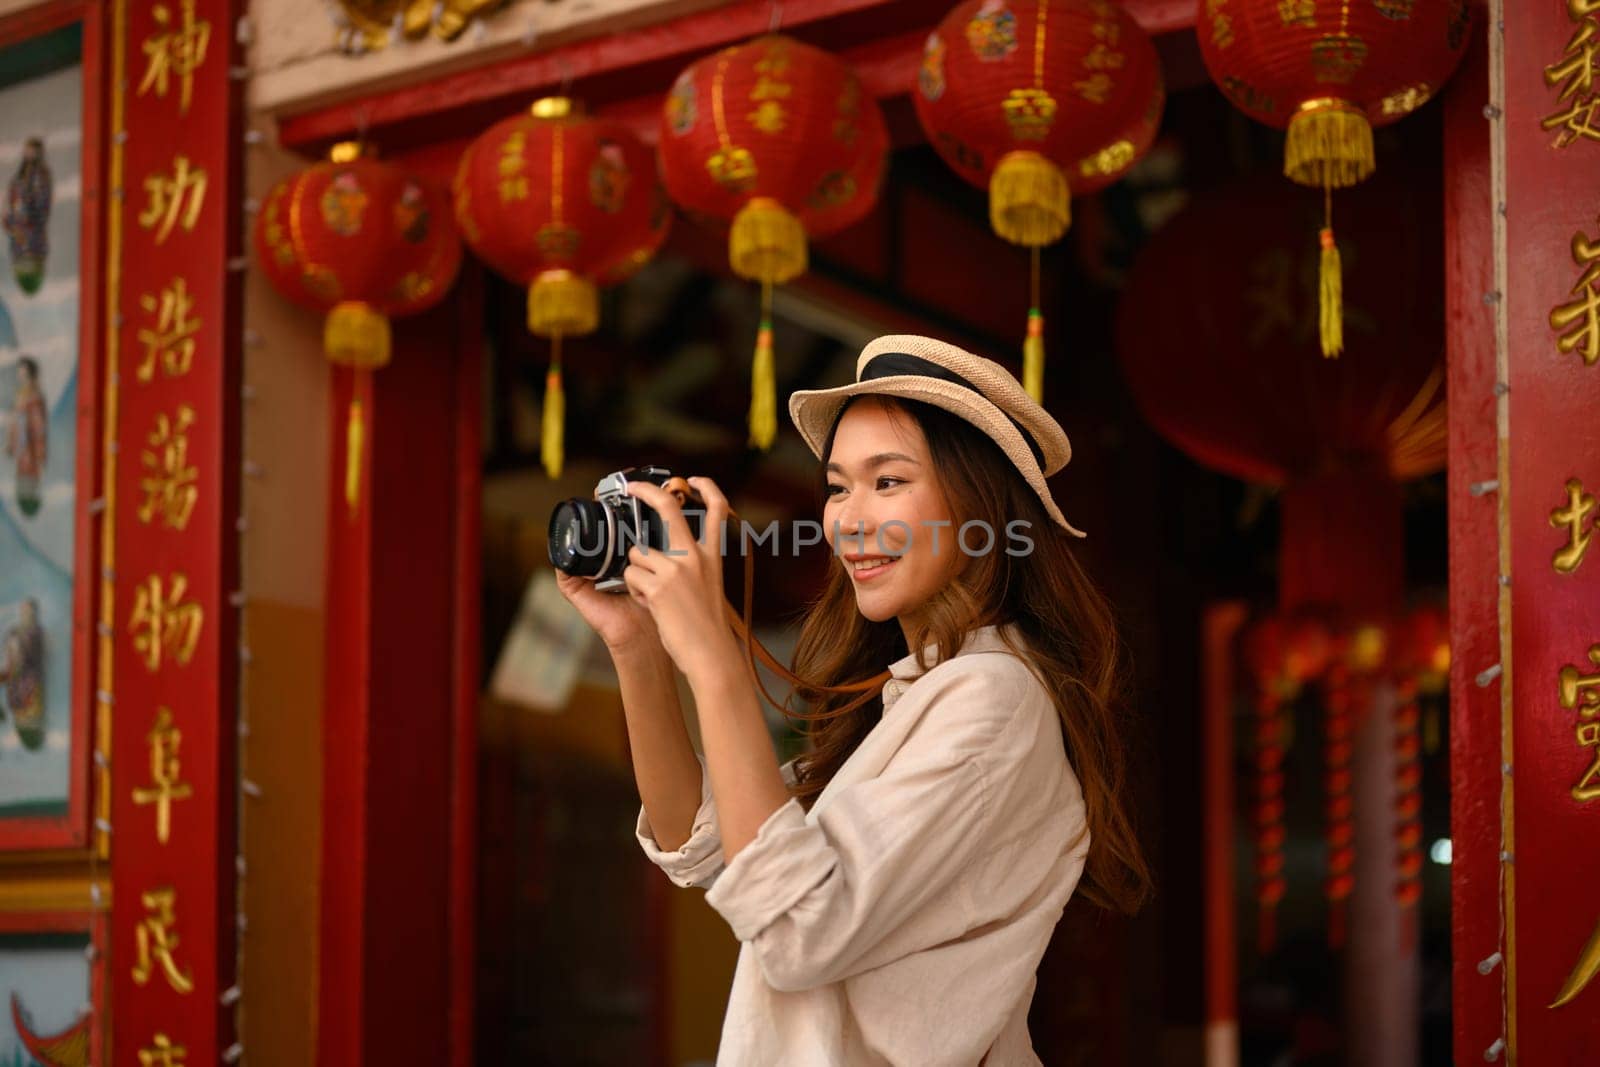 Smiling young woman standing at Chinese Temple with beautiful red lanterns adorning, taking photo with camera.